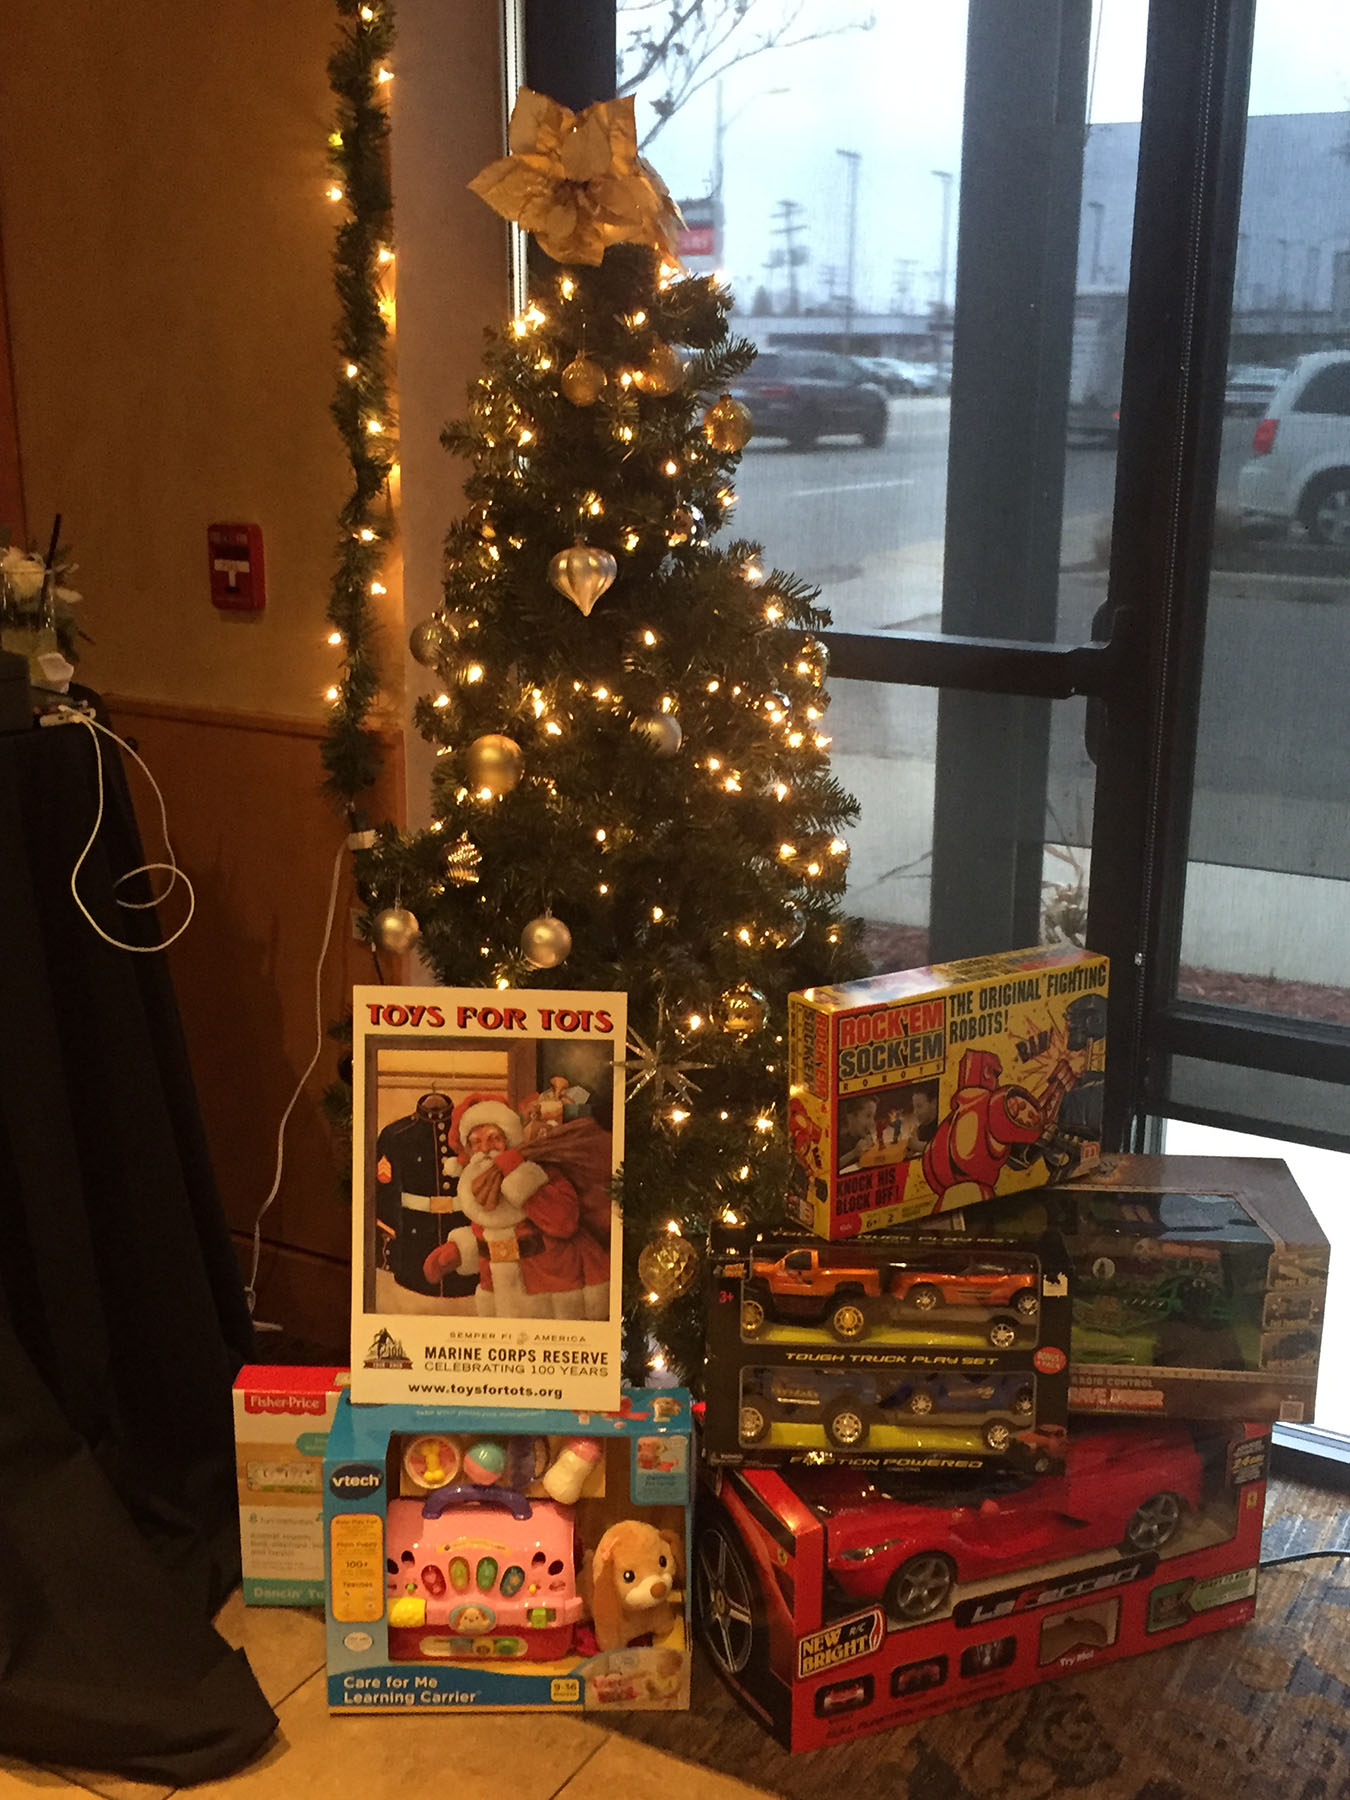 2017 - Toys and monetary donation collection for Toys For Toys at our holiday client party